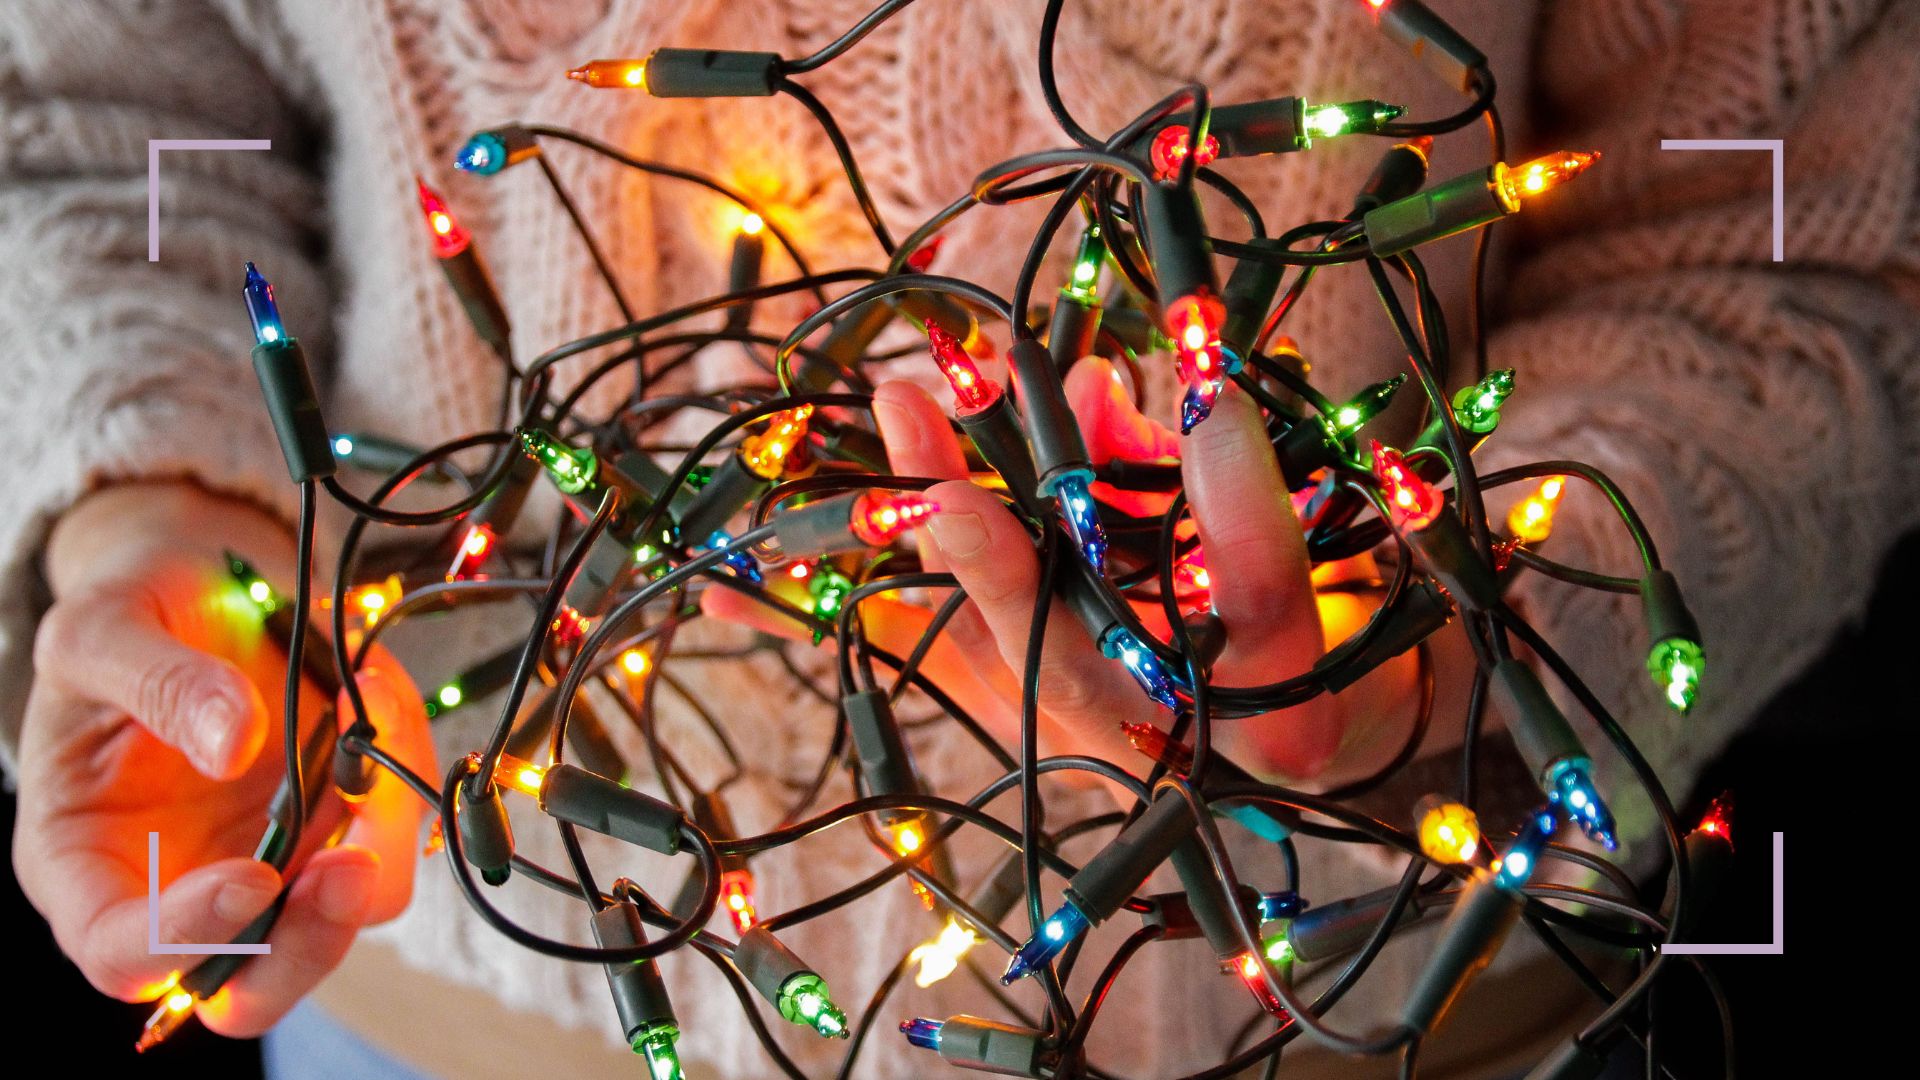 Christmas Light Storage Solutions: No More Tangled Strings & Strands